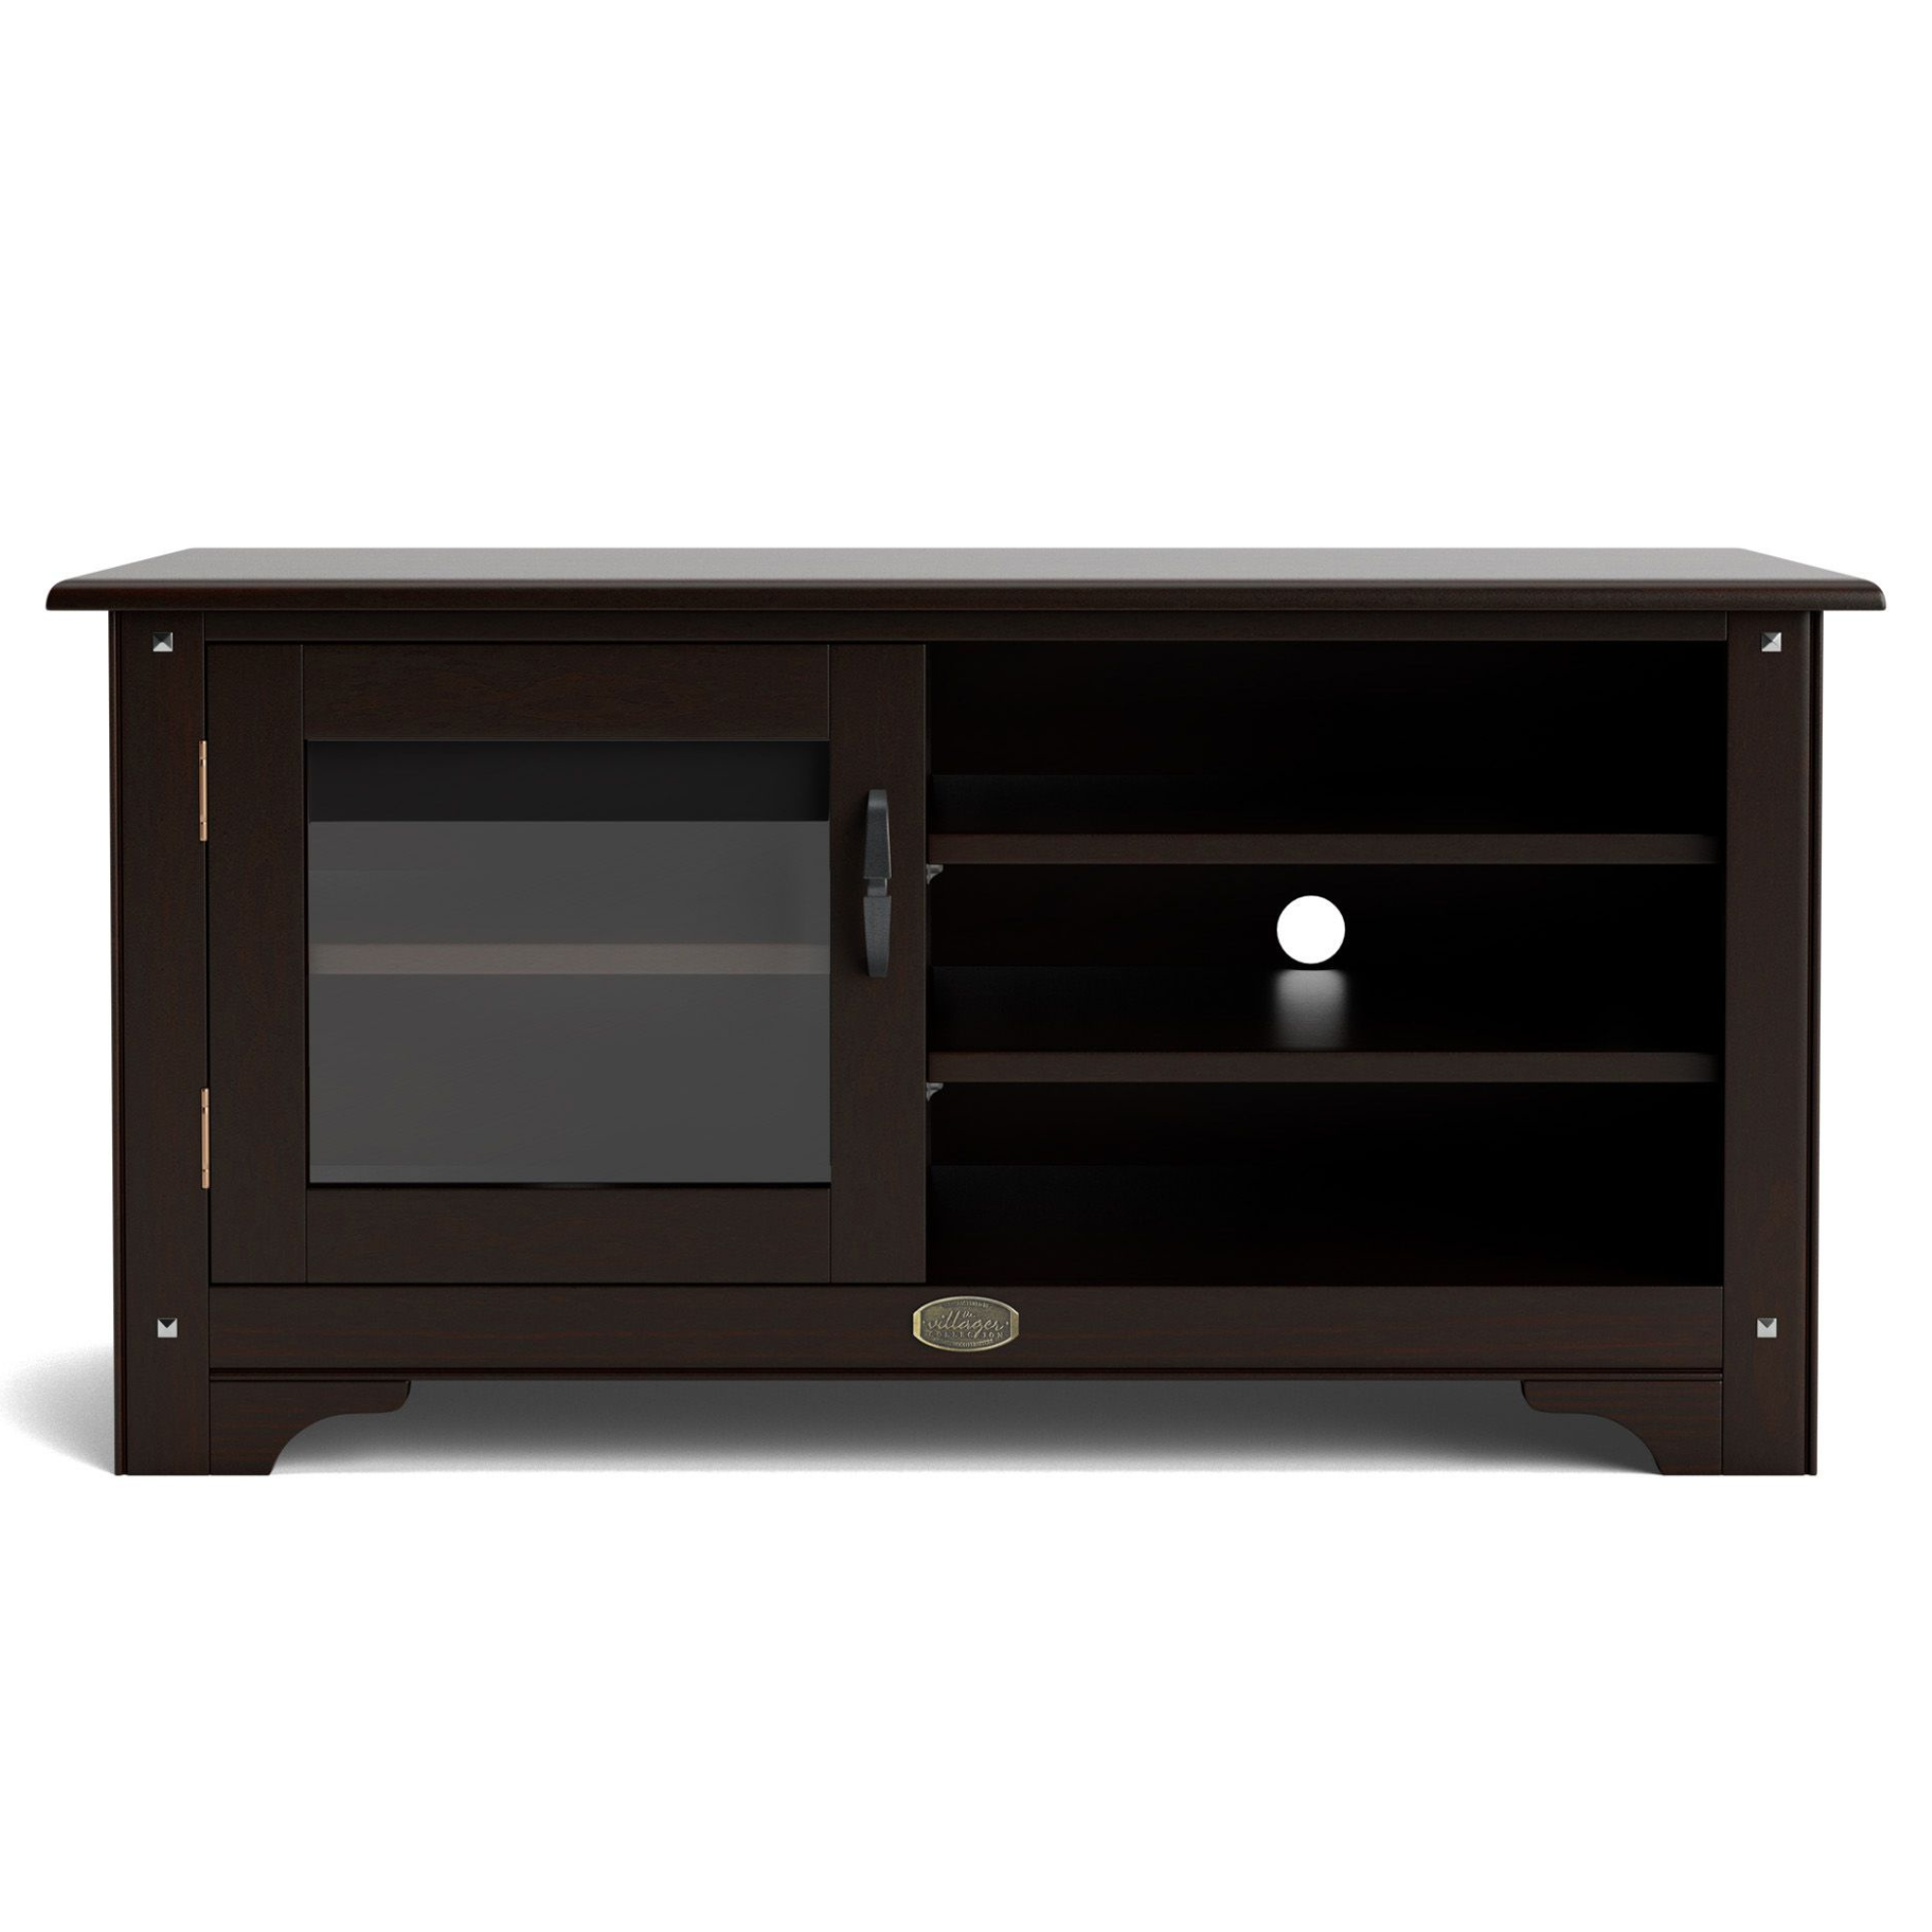 VILLAGER SMALL ENTERTAINMENT UNIT | NZ MADE